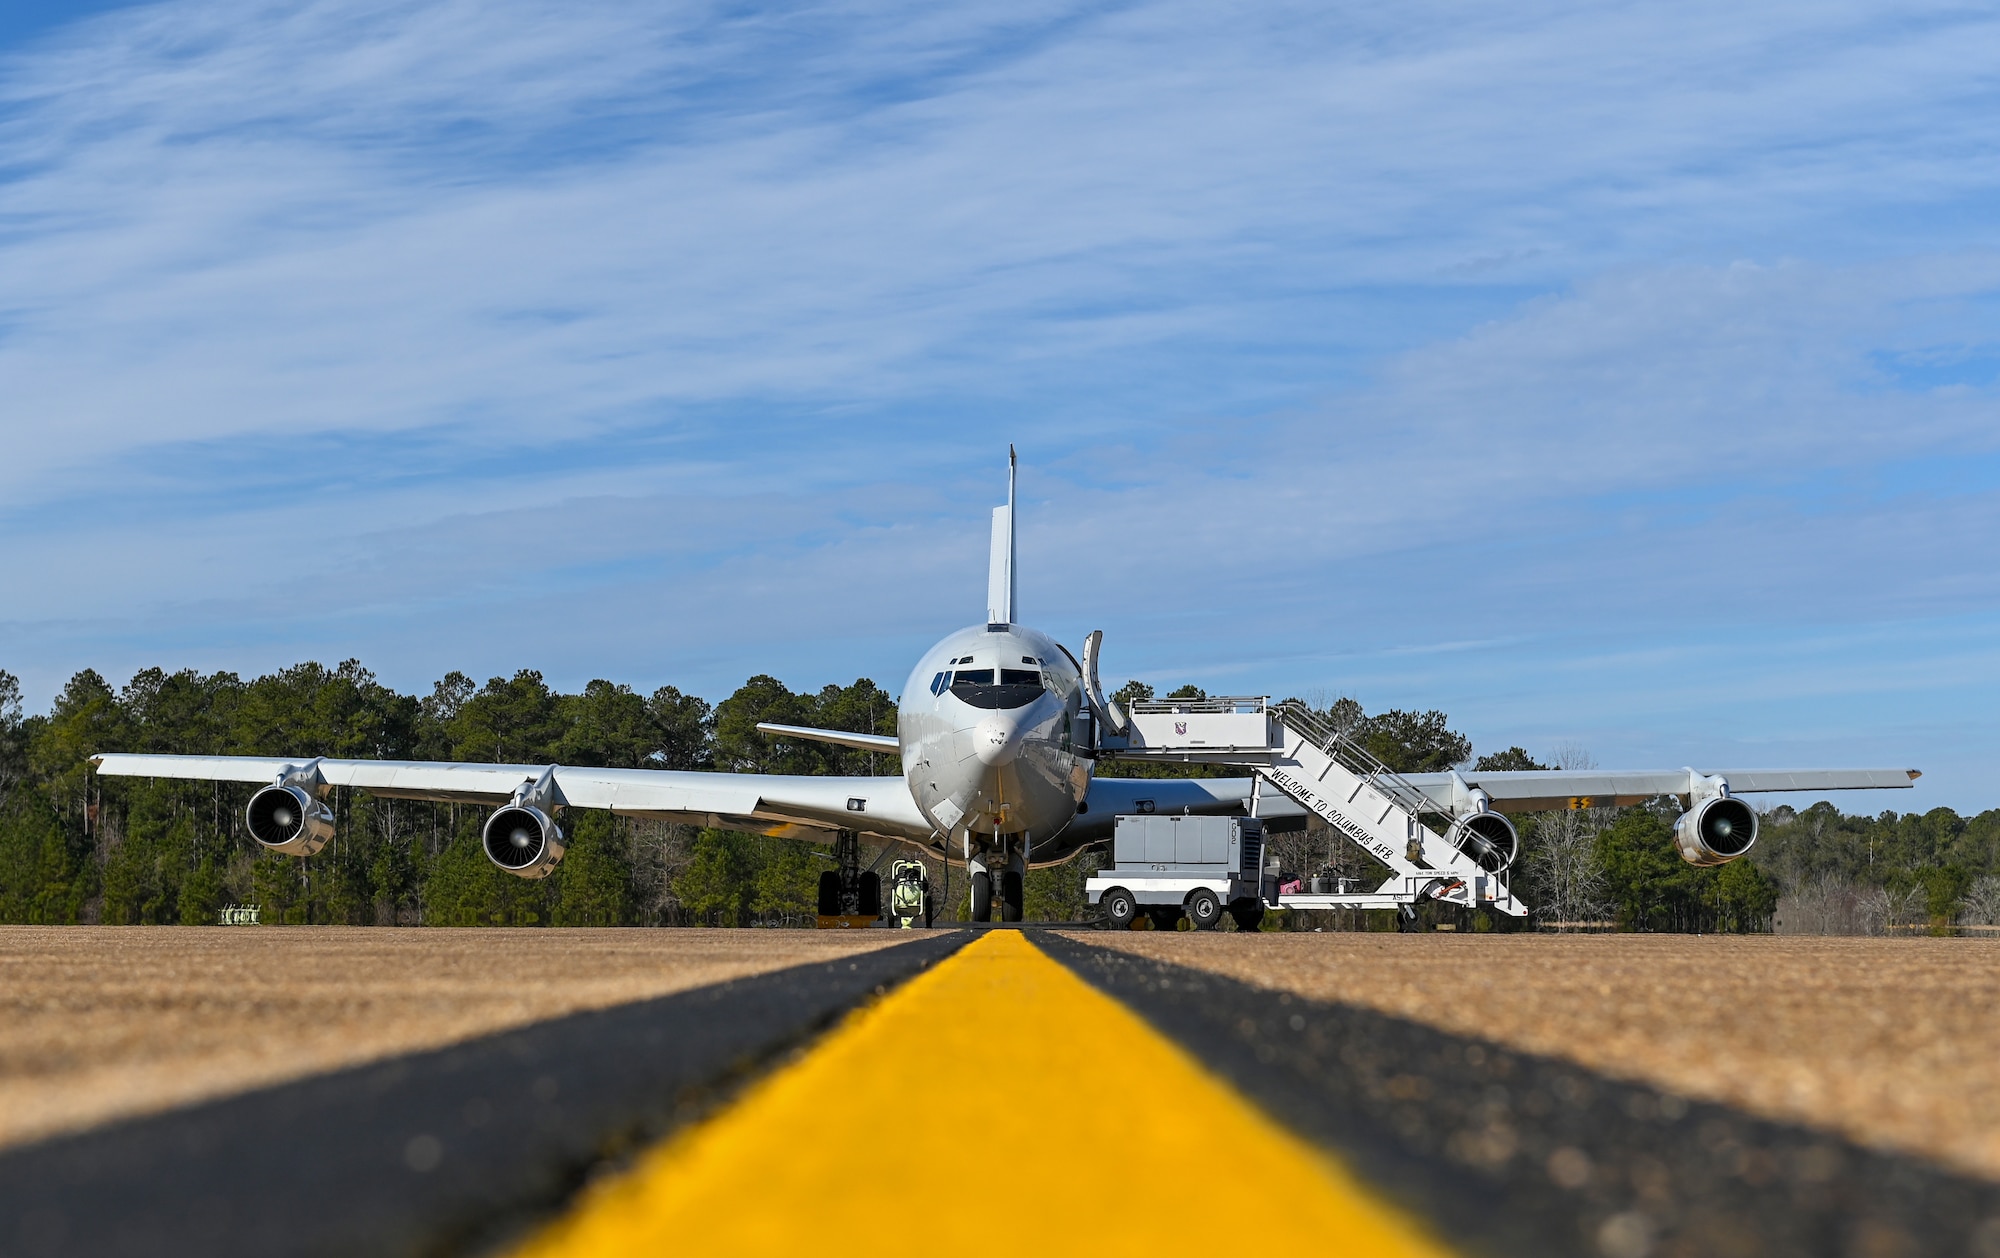 A U.S. Air Force E-8C Joint Stars sits on a flightline for a static display on Feb. 5, 2020, at Columbus Air Force Base, Miss. The E-8C's primary mission is to provide theater ground and air commanders with ground surveillance to  support attack operations and targeting that contributes to the delay, disruption and destruction of enemy forces. (U.S. Air Force photo by Airman 1st Class Davis Donaldson)